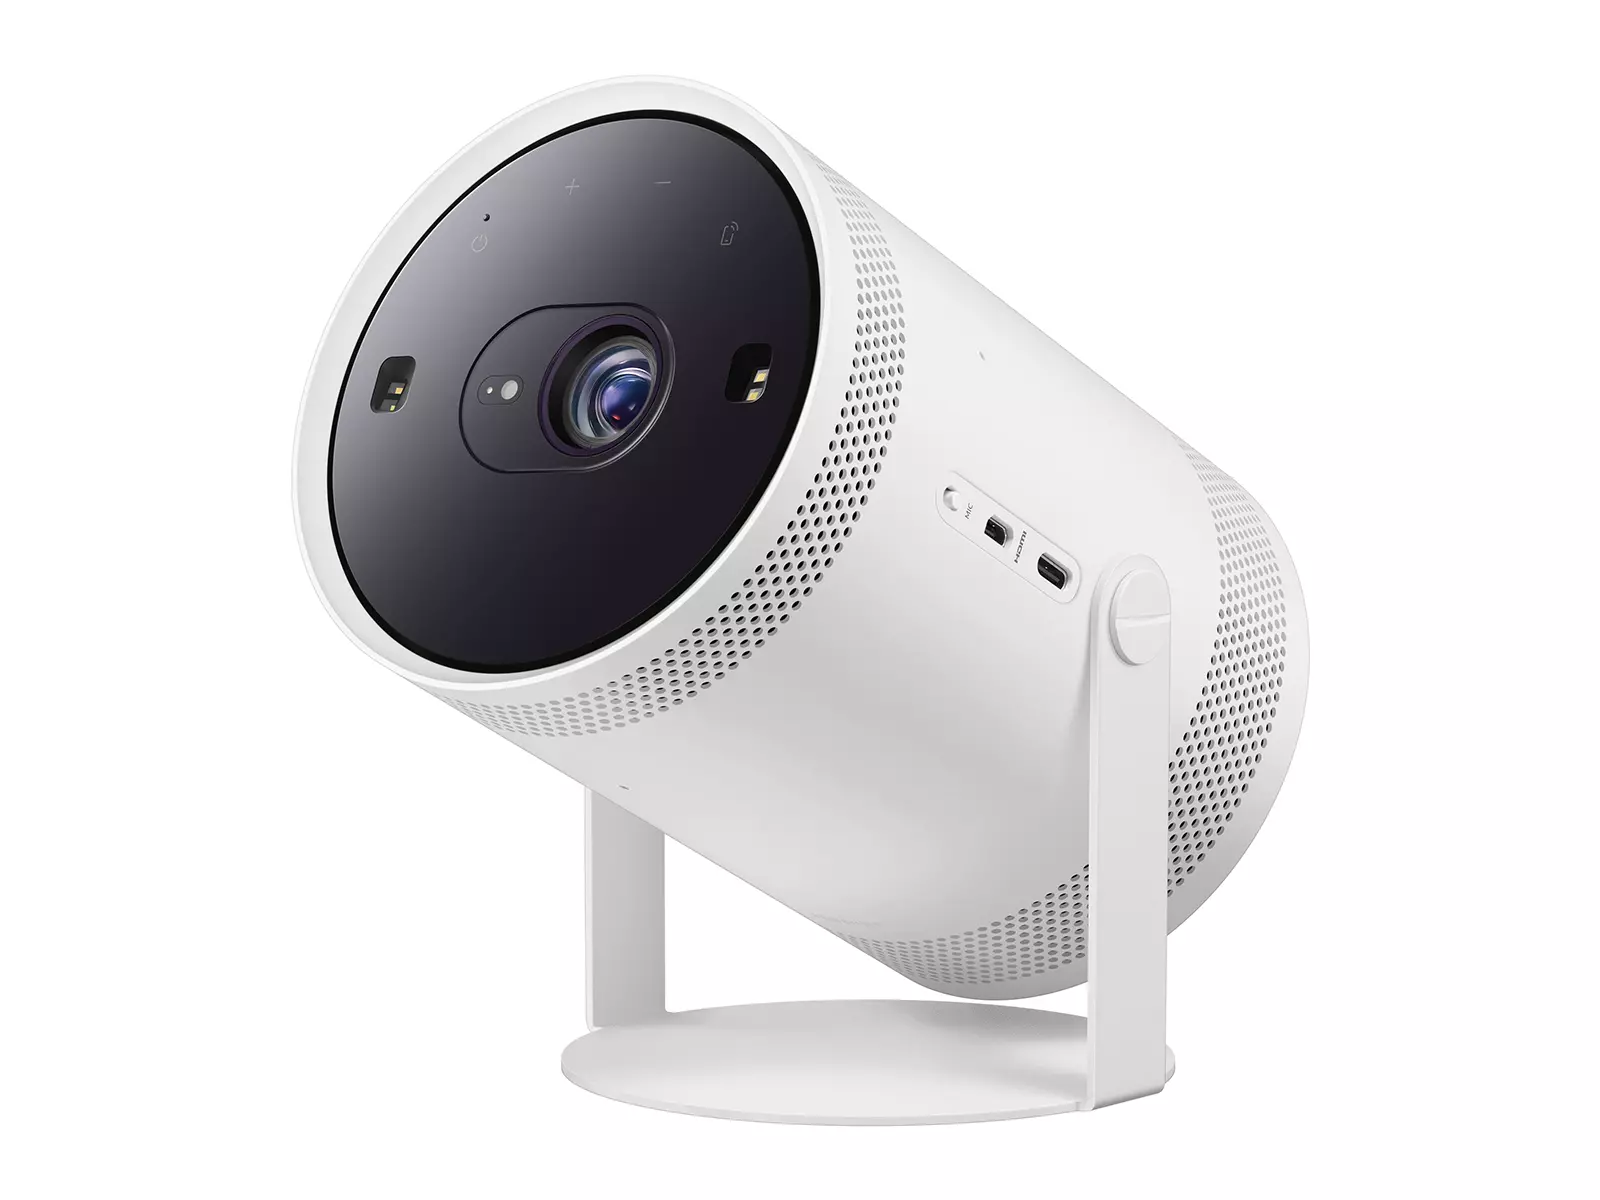 Samsung Freestyle projector against white background